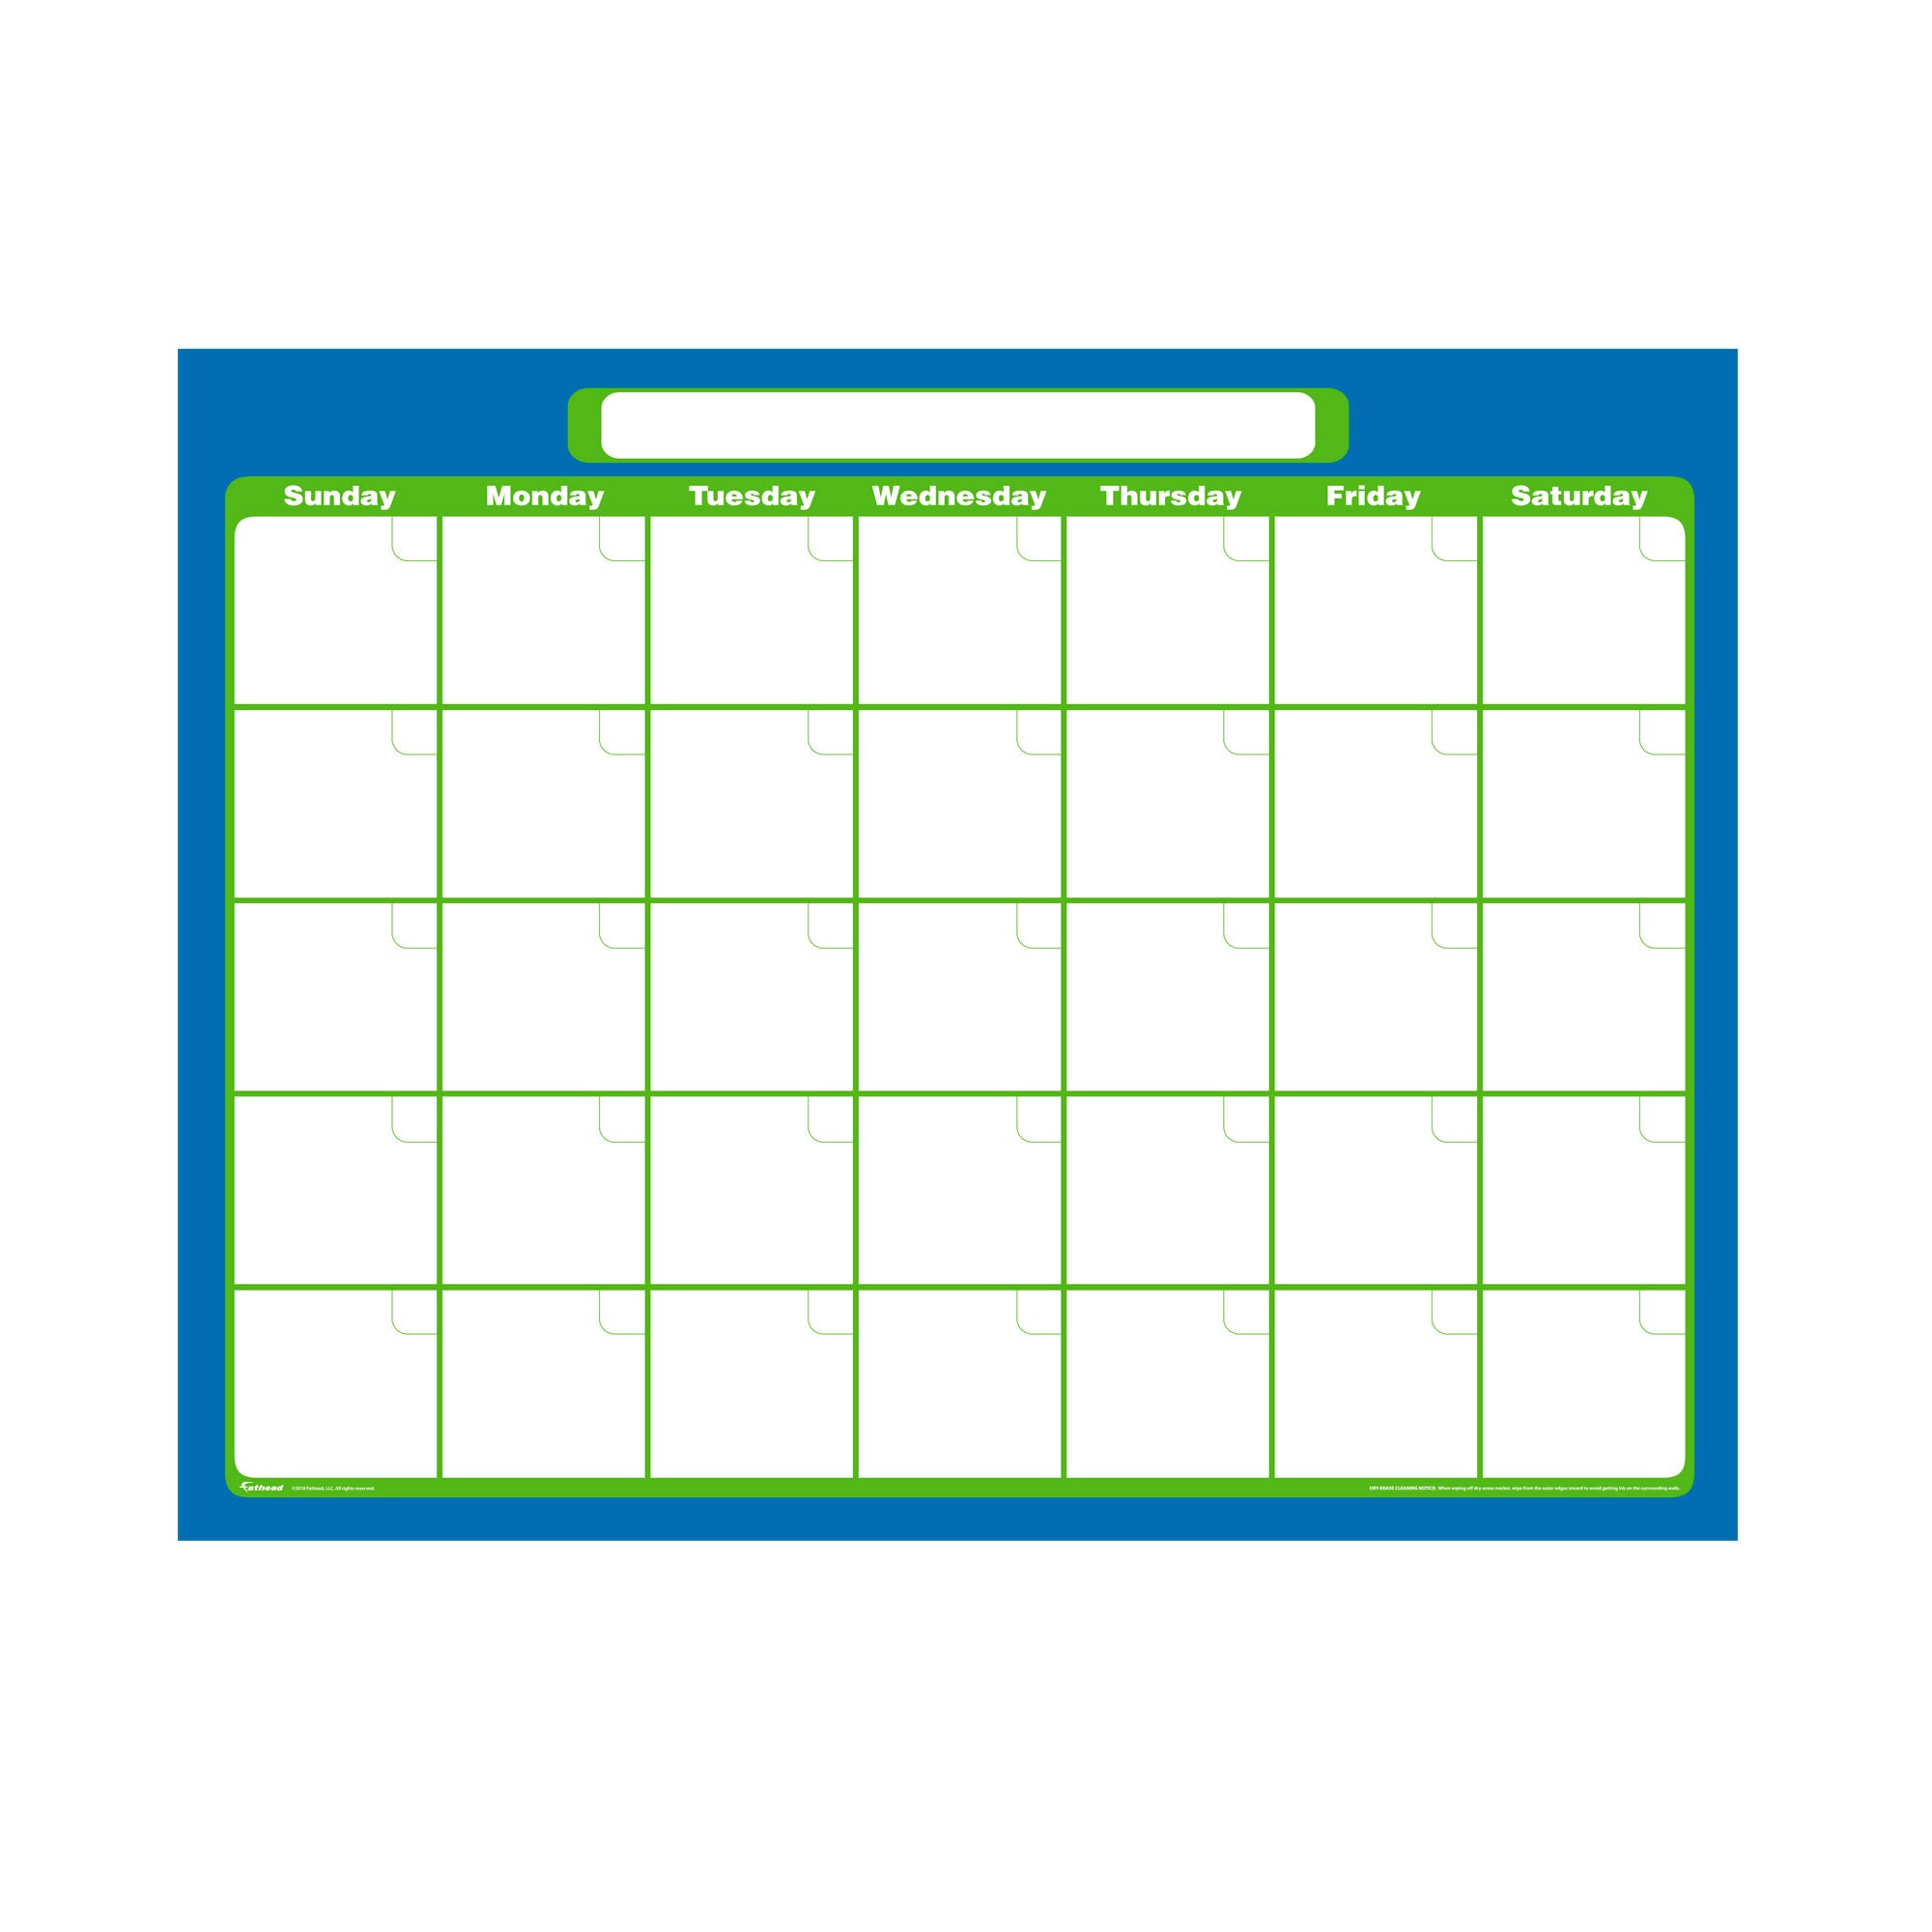 One Month Calendar Dry Erase Removable Wall Adhesive Decal in Royal Blue/Green 27"W x 39.5"H by Fathead | Vinyl